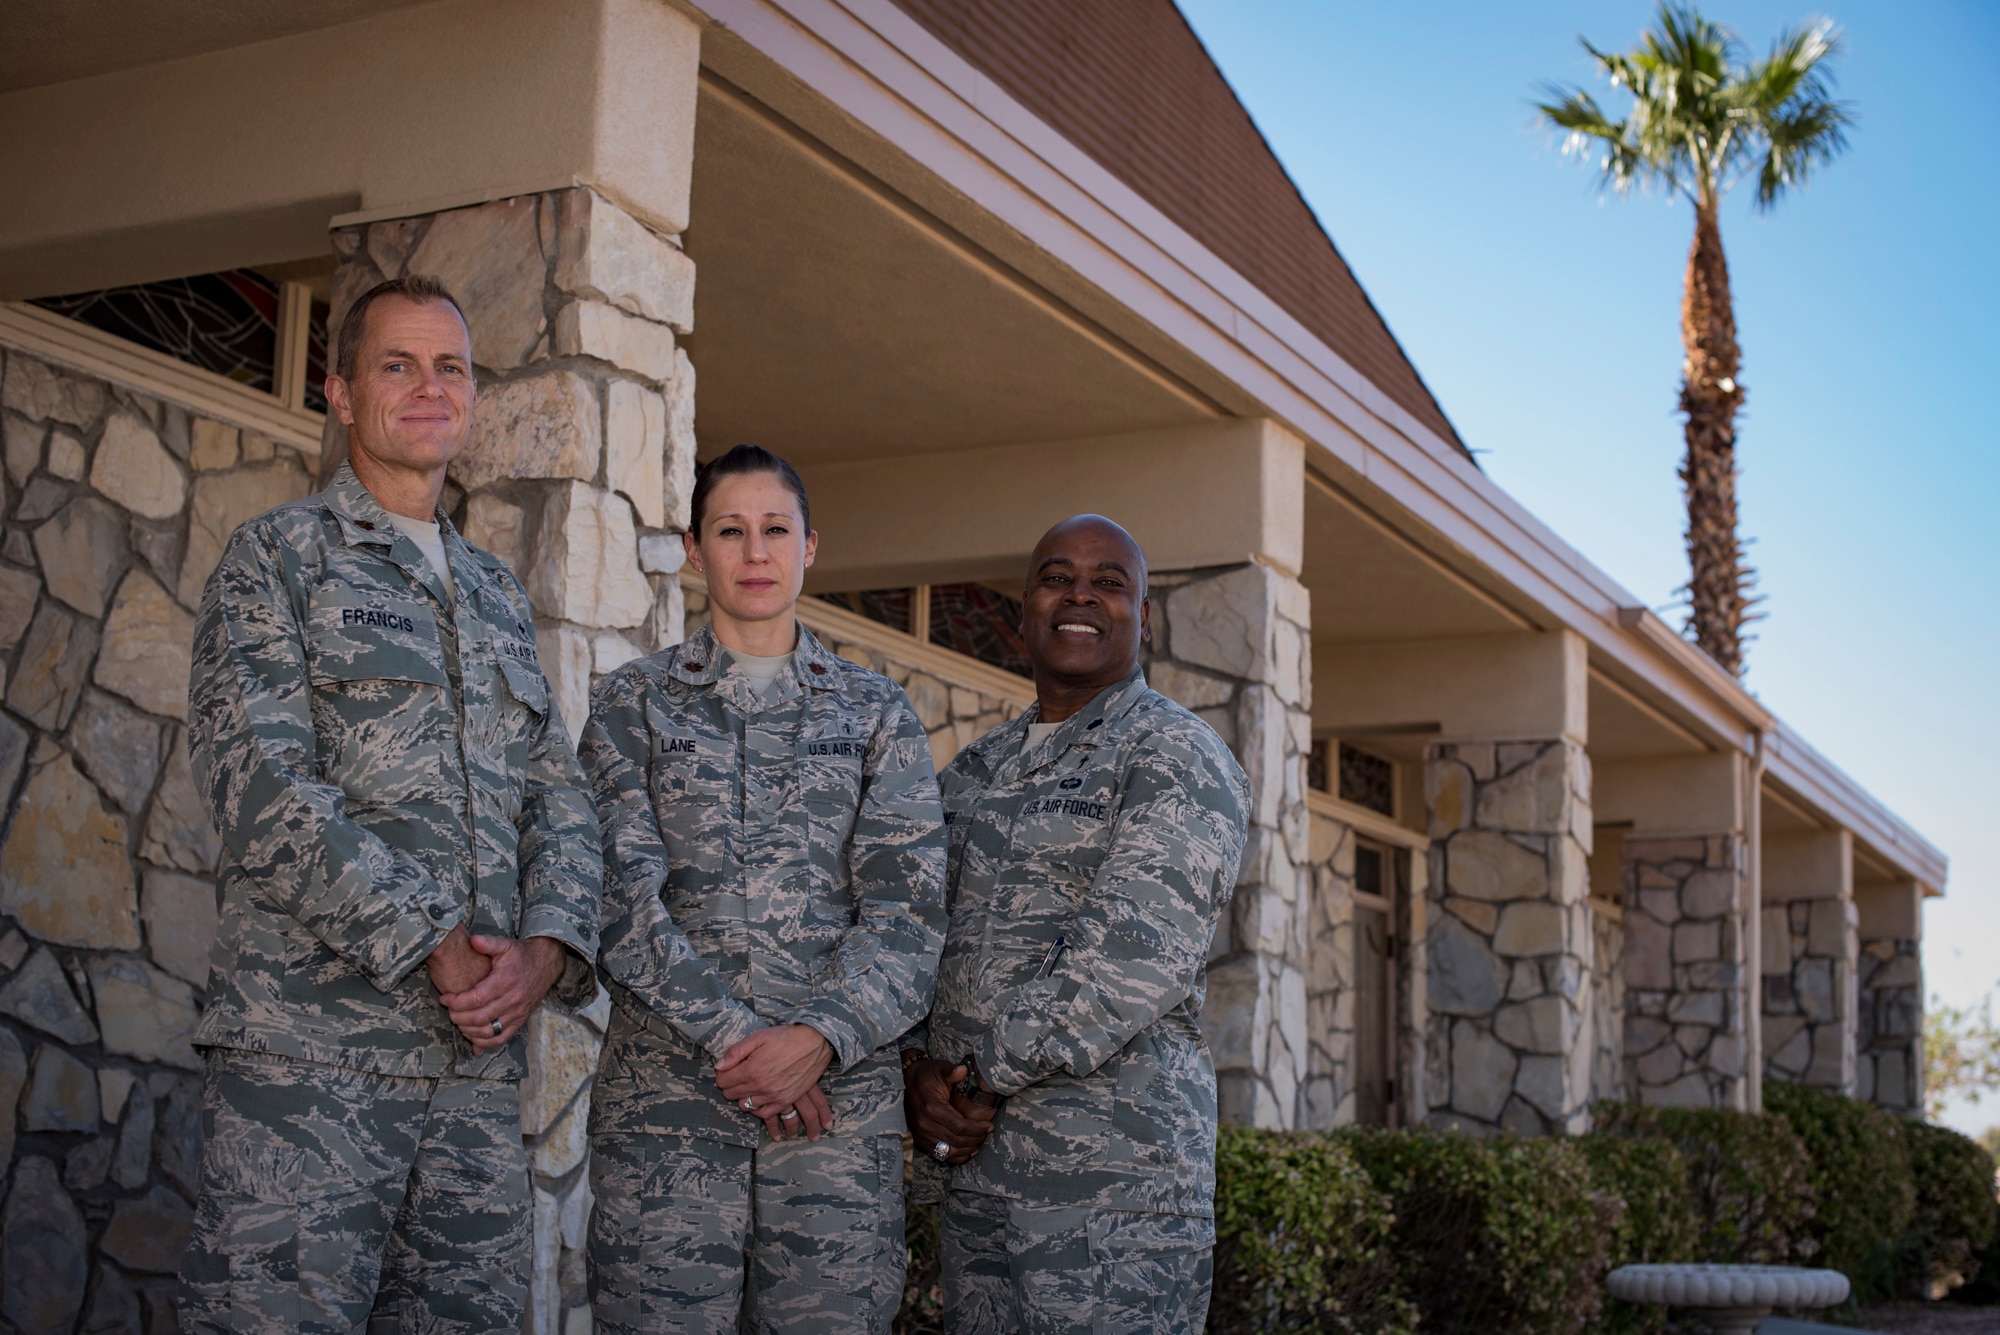 Maj. Kelvin Francis, 99th Air Base Wing chaplain, Maj. Kimberly Lane, 99th Medical Operations Squadron clinical social worker, and Lt. Col. Dwayne Jones, 99th Air Base Wing chaplain, stand in front of the base chapel at Nellis Air Force Base, Nev., Oct. 5, 2017. They are part of the Nellis Disaster Mental Health team that provides services to anyone affected by the recent Las Vegas shooting. (U.S. Air Force photo by Airman 1st Class Andrew D. Sarver/Released)